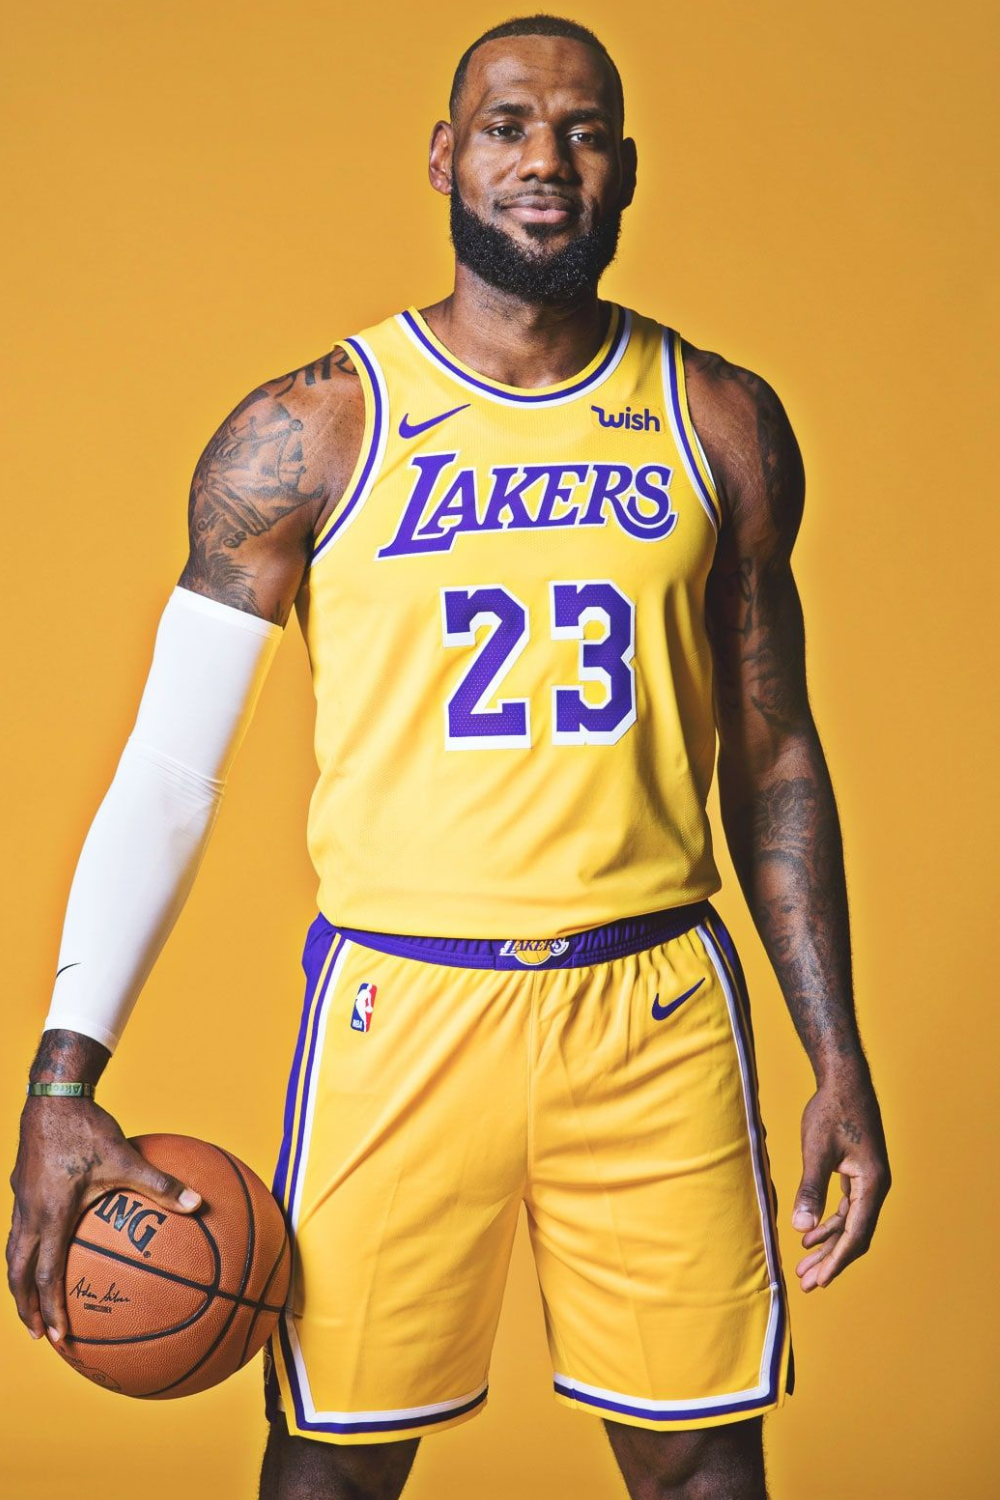 LeBron James, Small forward For The Lakers